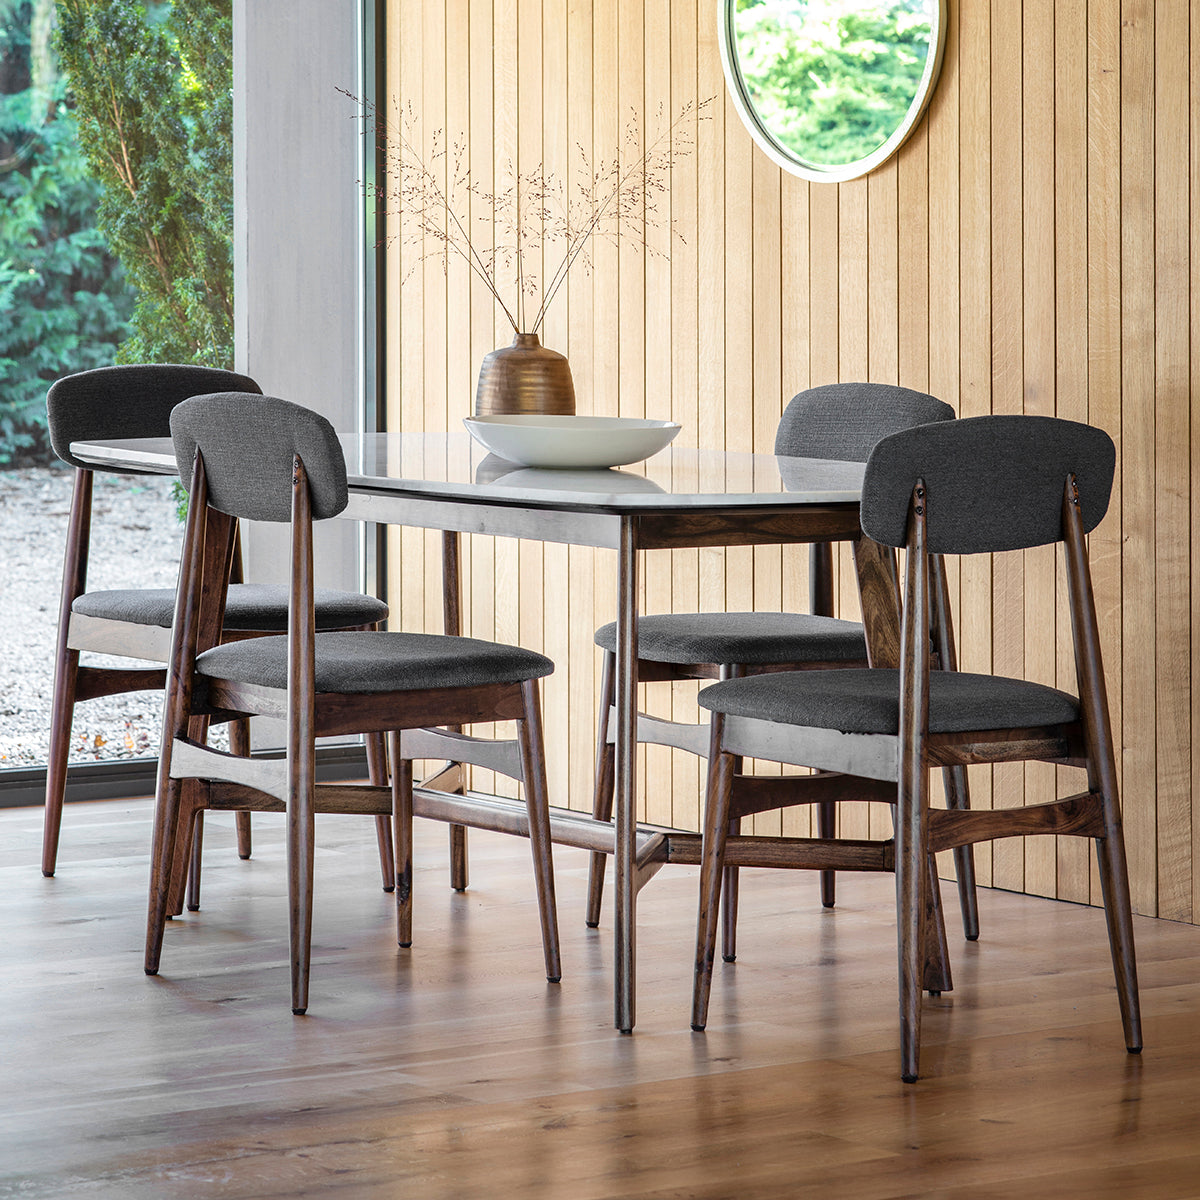 Four Andalusia Dining Chairs with the dining table in the room setting